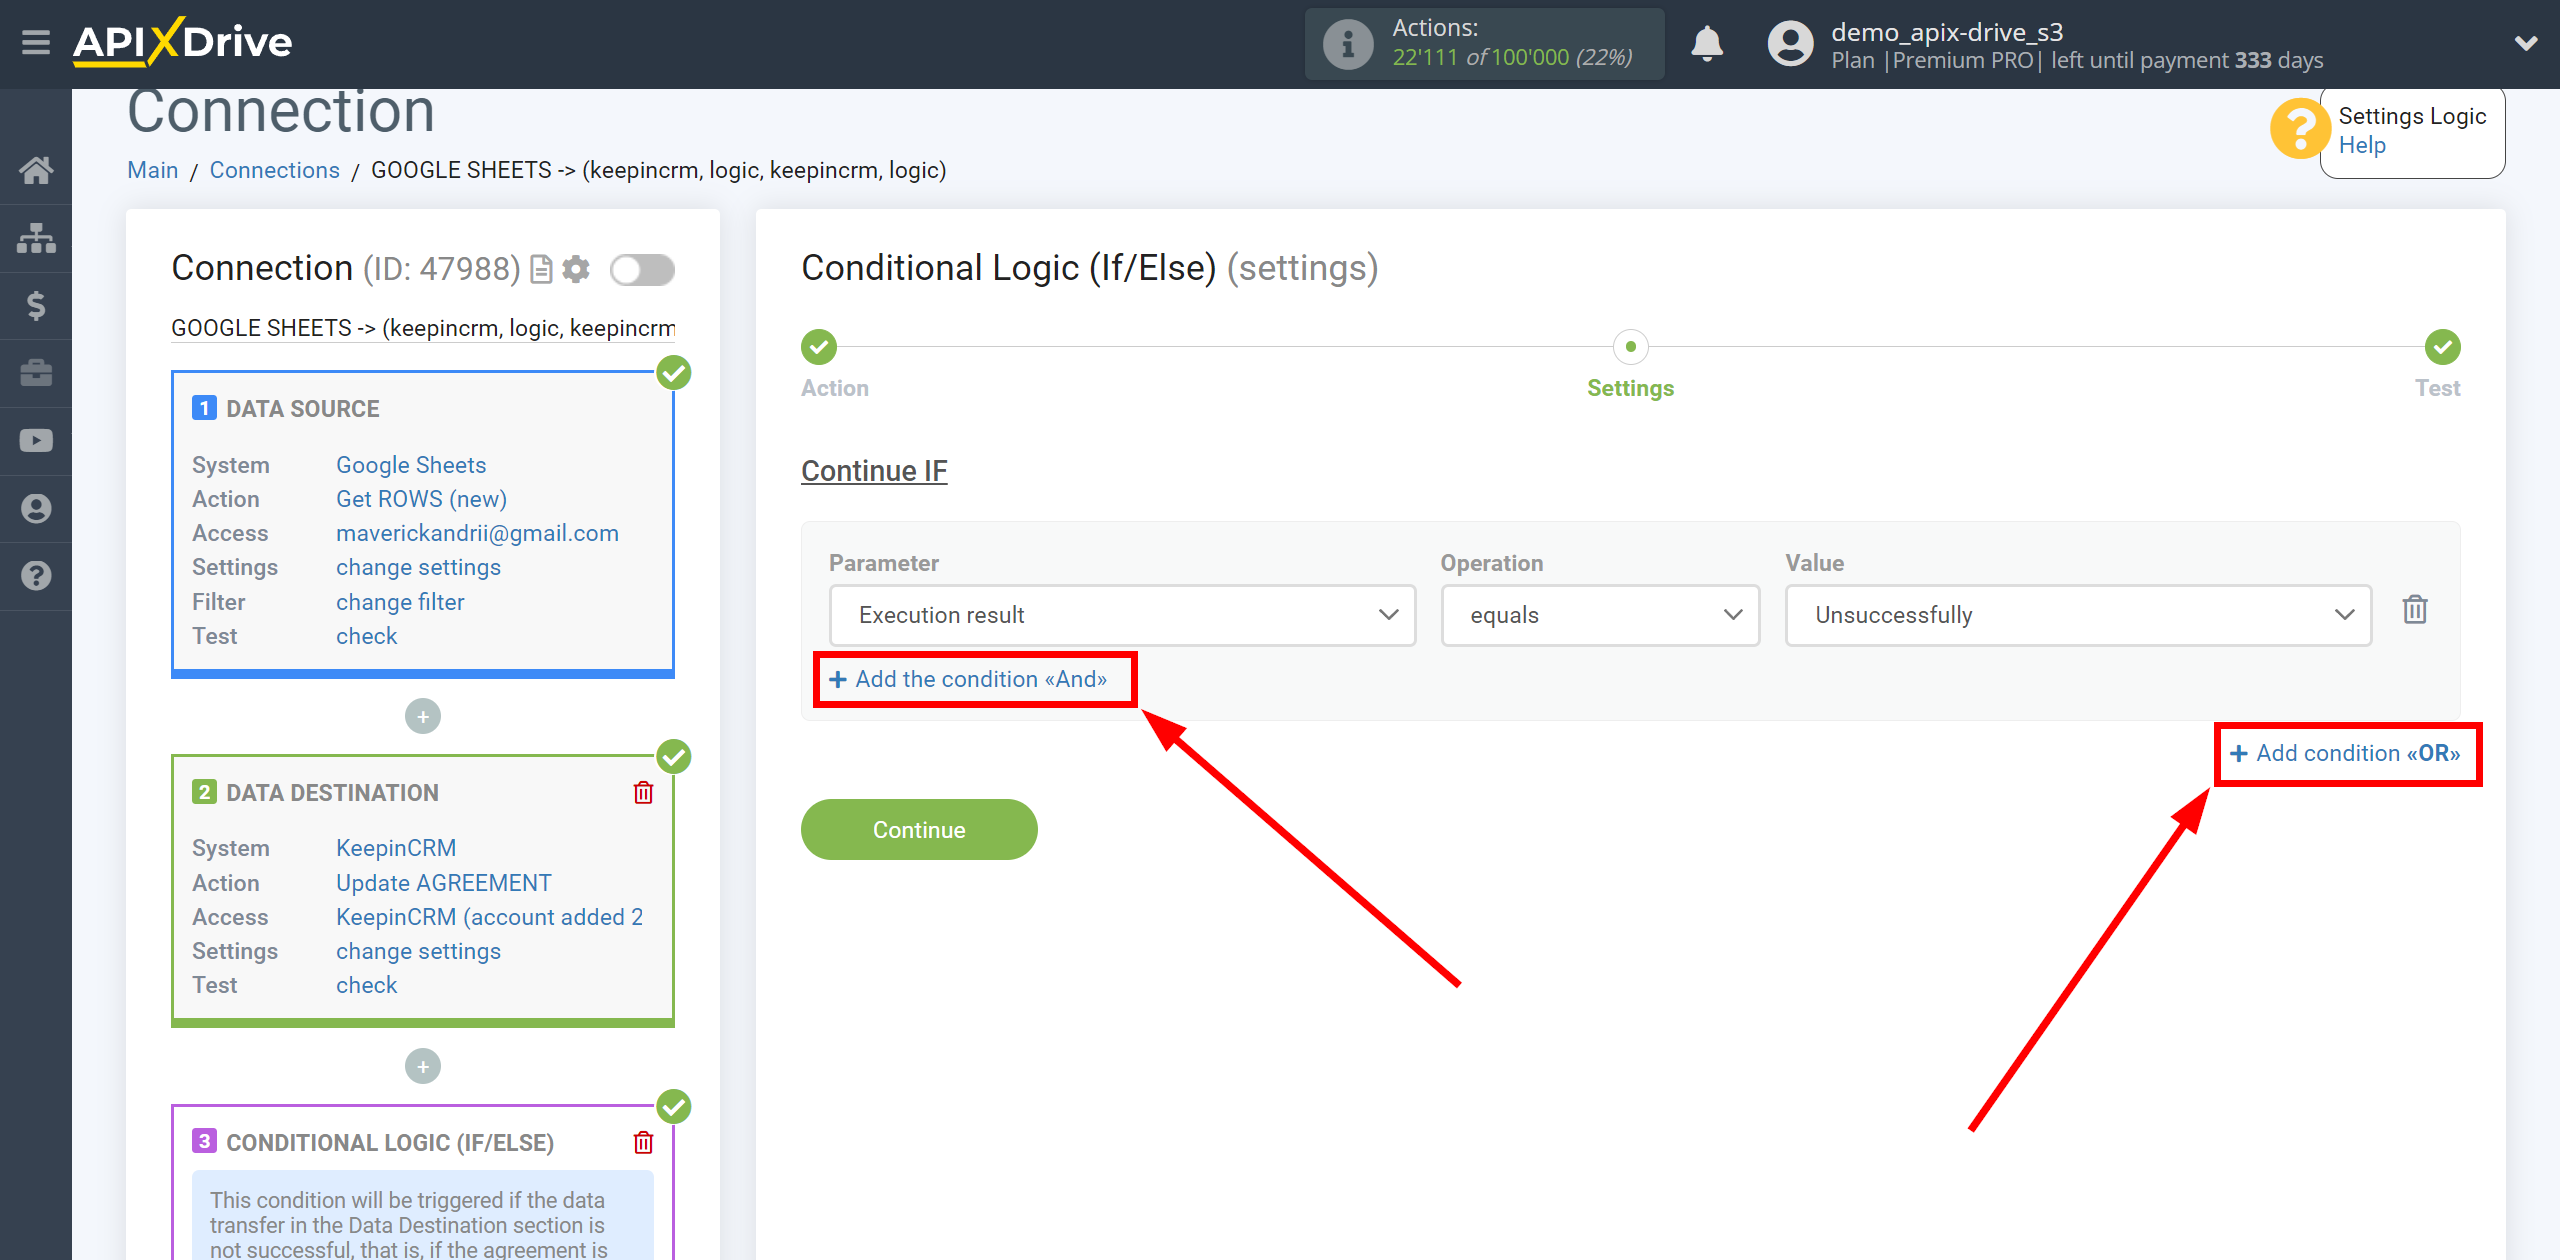 How to setup KeepinCRM Update Agreement / Create Agreement | Additional conditions "AND", "OR"